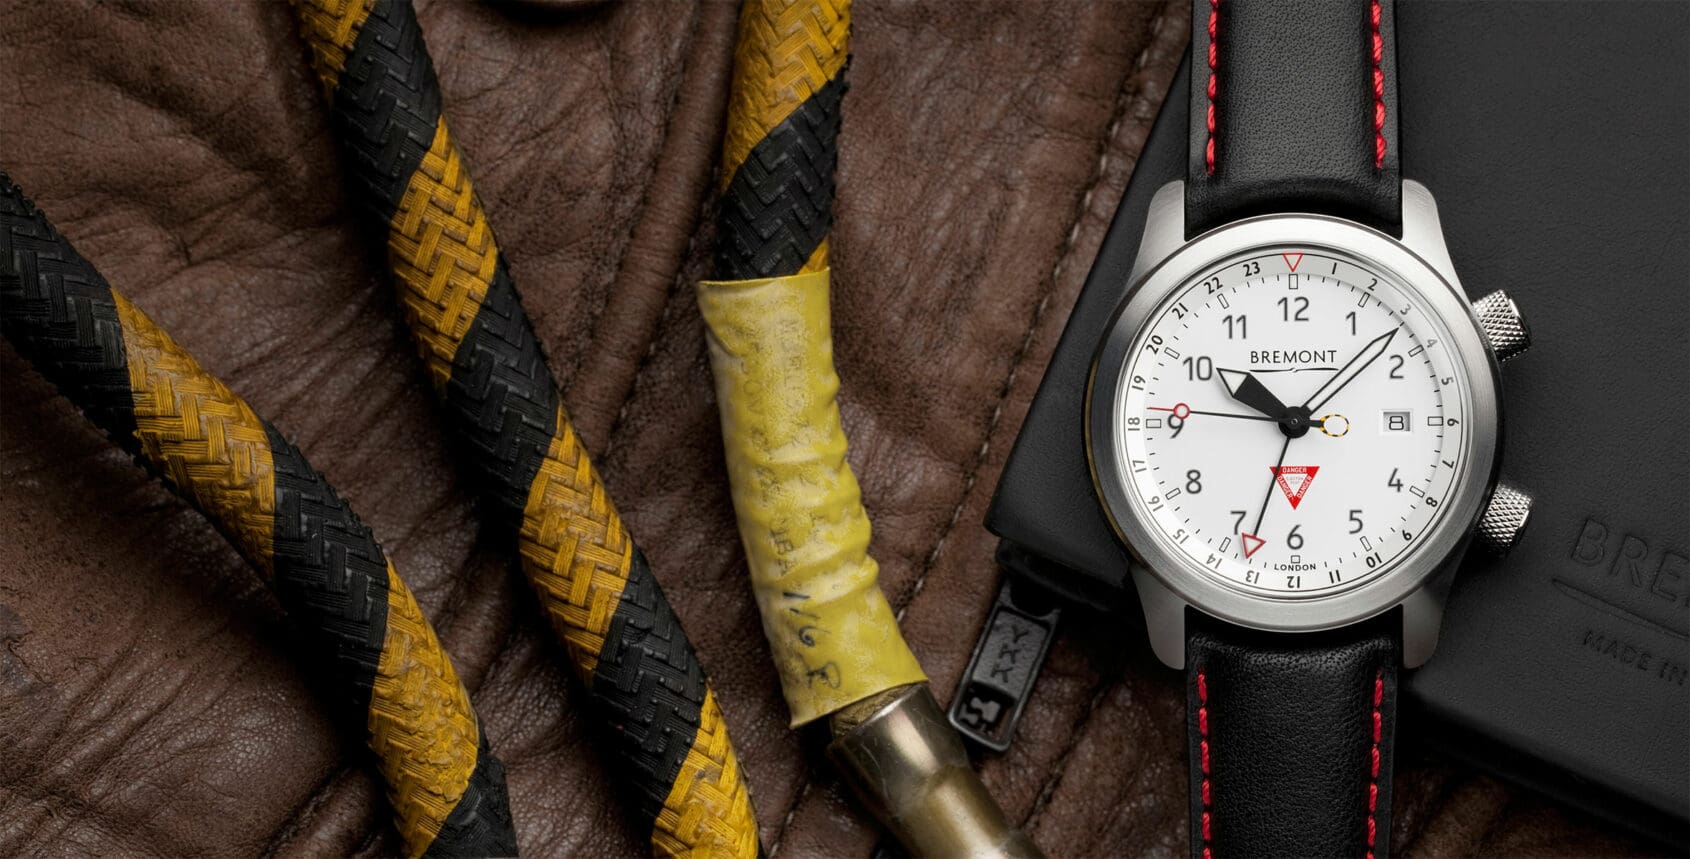 INTRODUCING: The Bremont MBIII 10th Anniversary limited edition